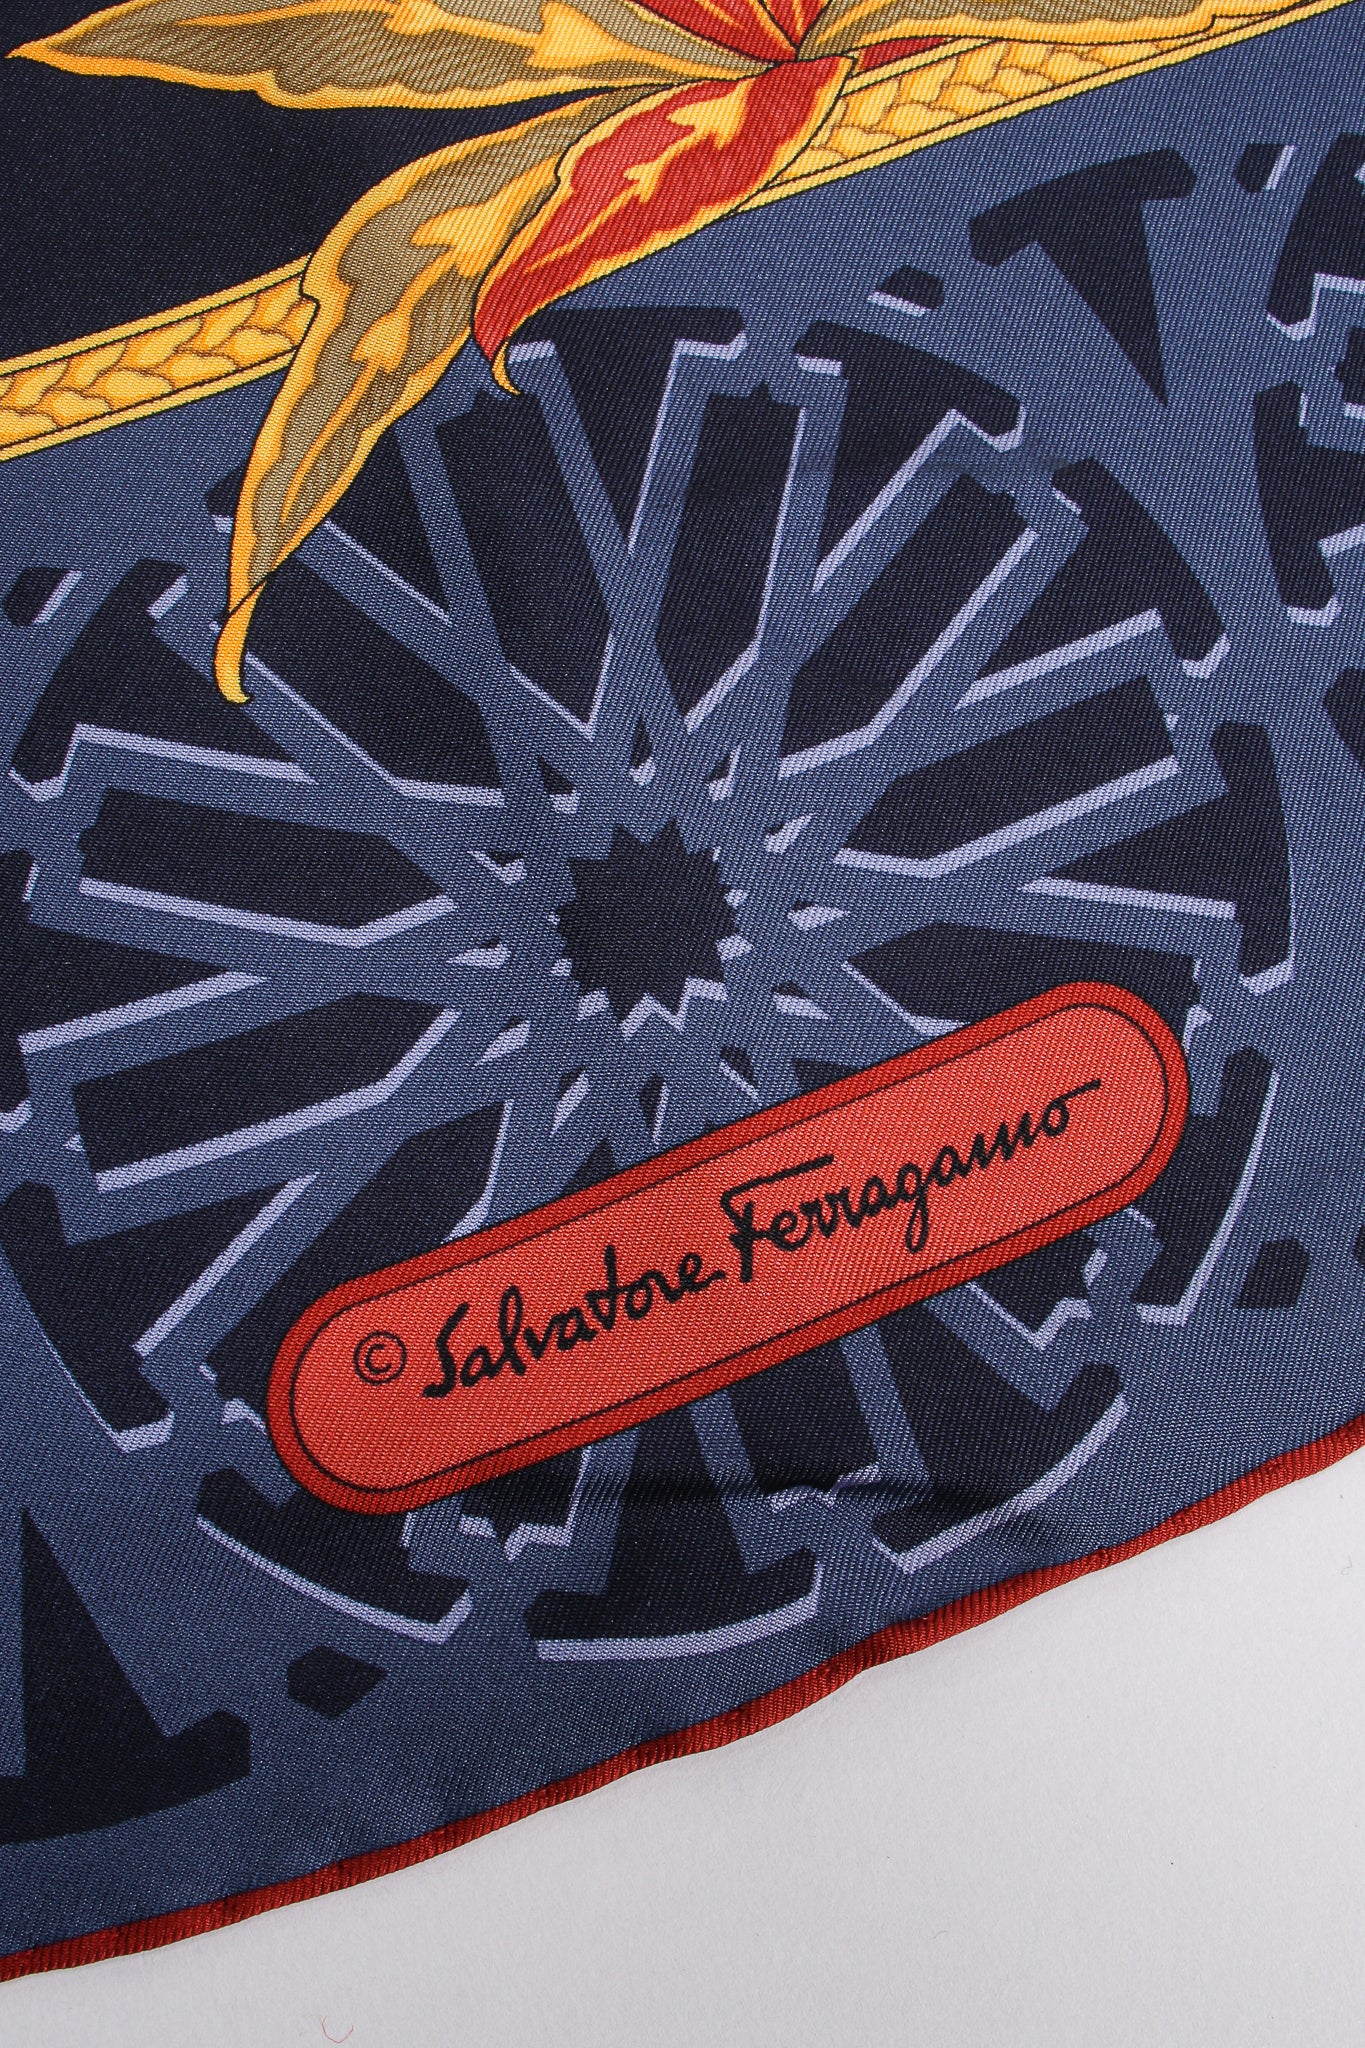 Vintage Salvatore Ferragamo Thousand And One Nights Silk Scarf detail at Recess Los Angeles